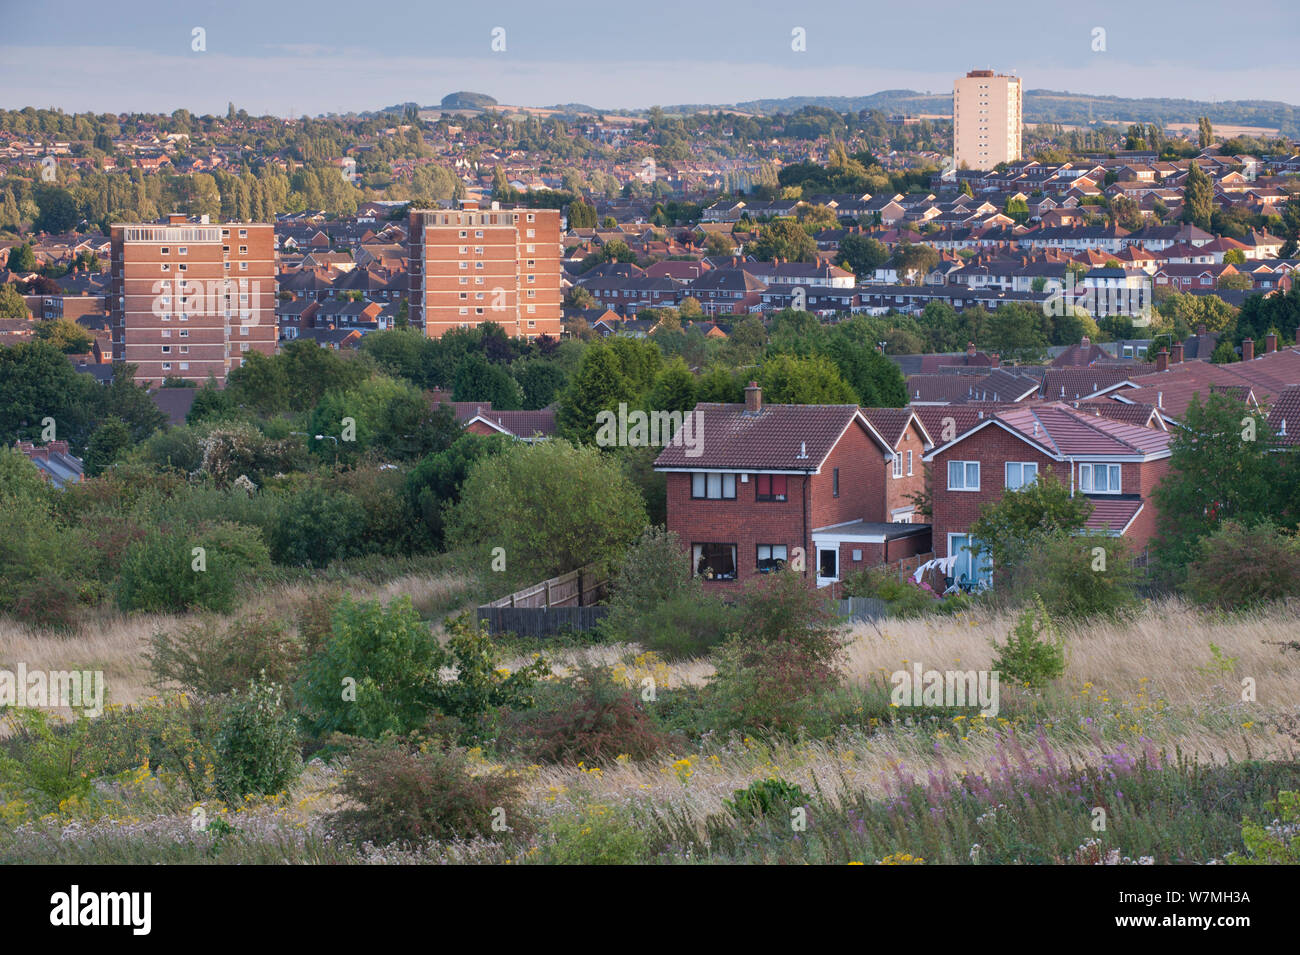 View from the Rowley Hills across Dudley, Sandwell and Birmingham, West Midlands, England, UK, August. 2020VISION Book Plate. Stock Photo